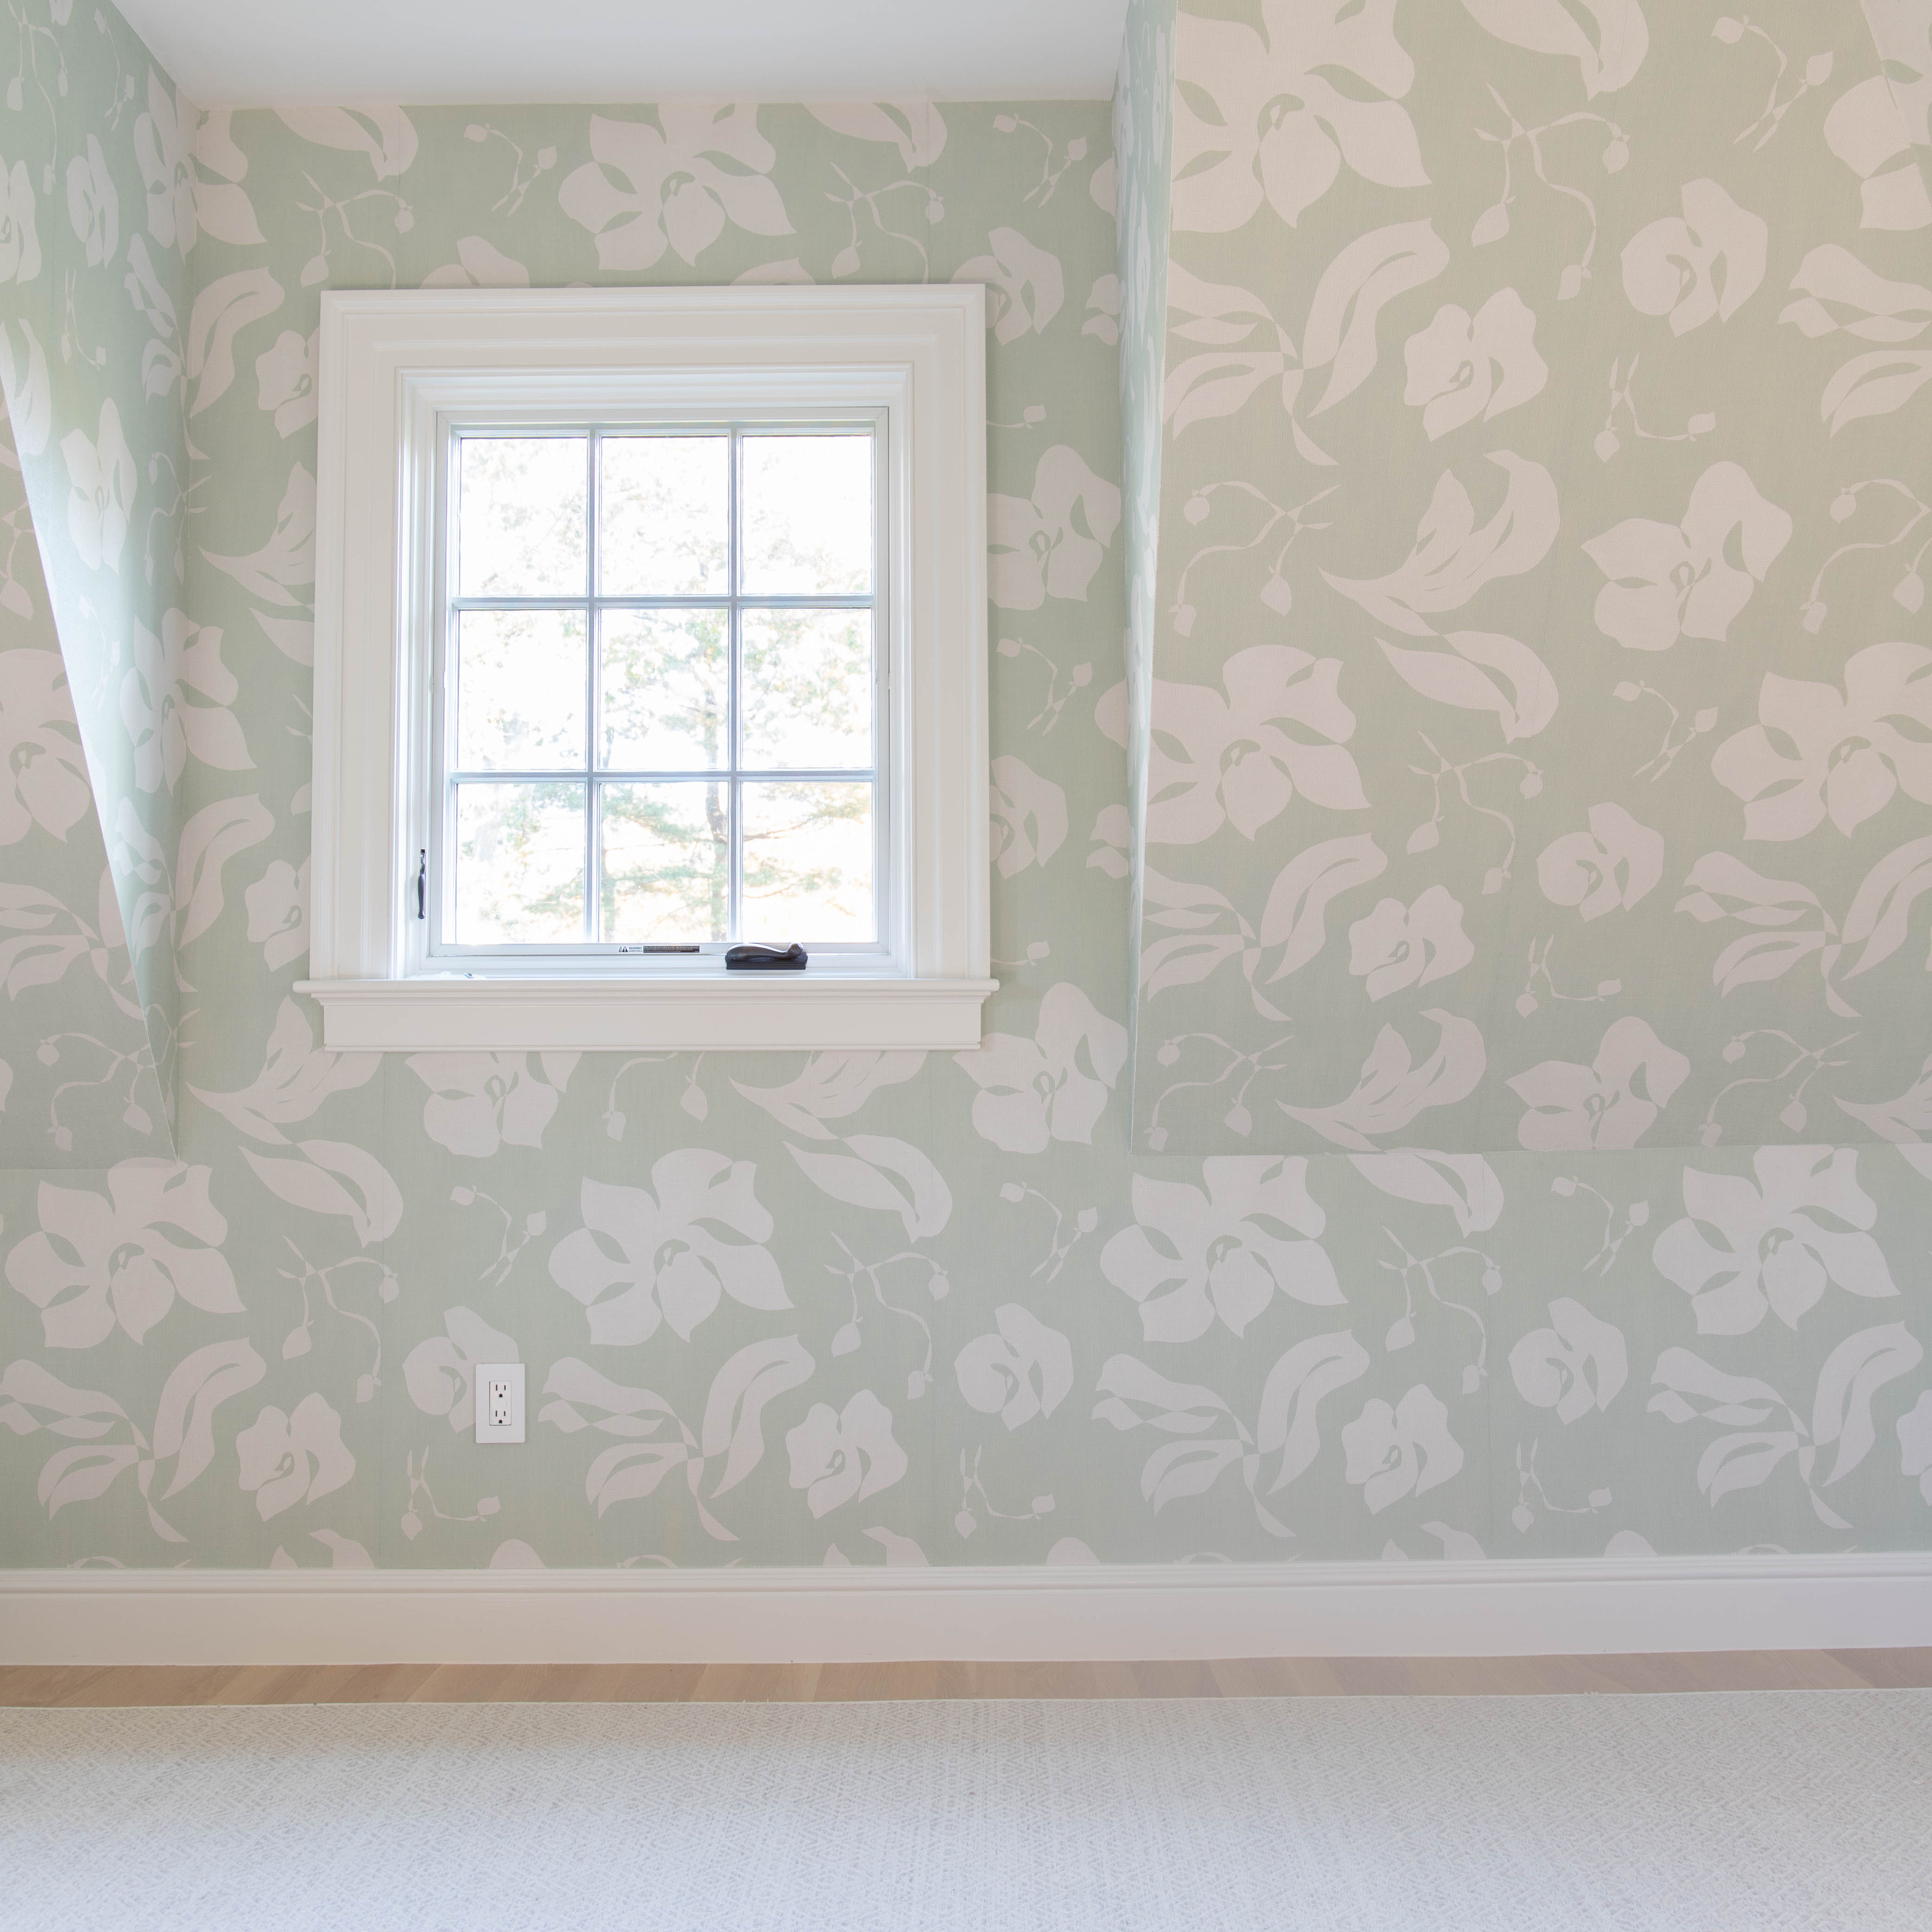 Empty room with mint green floral wallpaper and one window and a cream rug